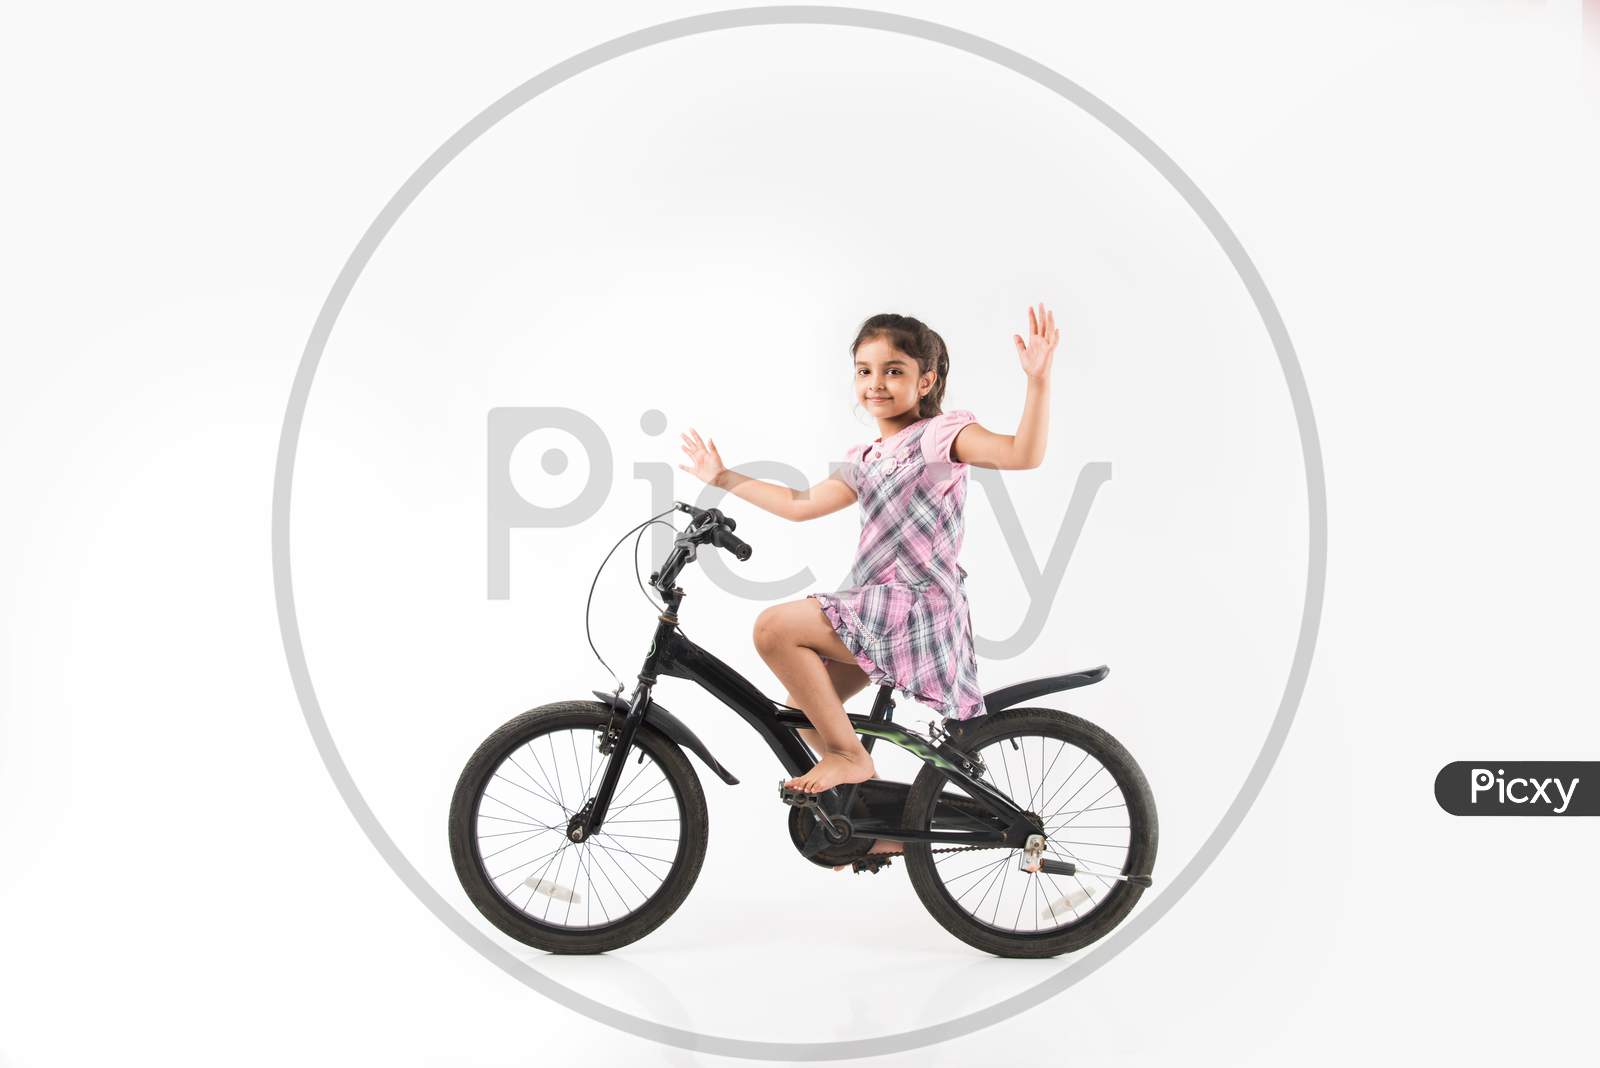 Cute little Indian/asian girl riding on bicycle, isolated over white background